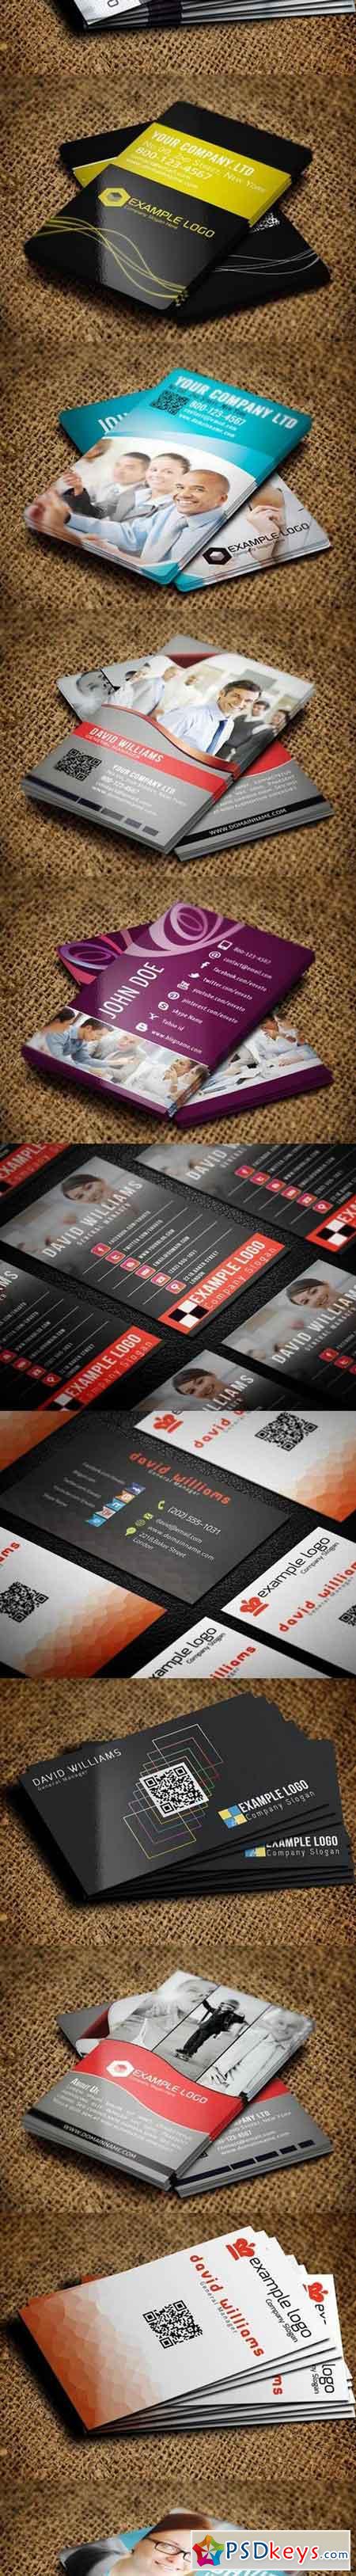 16x Corporate Business Cards 1654129